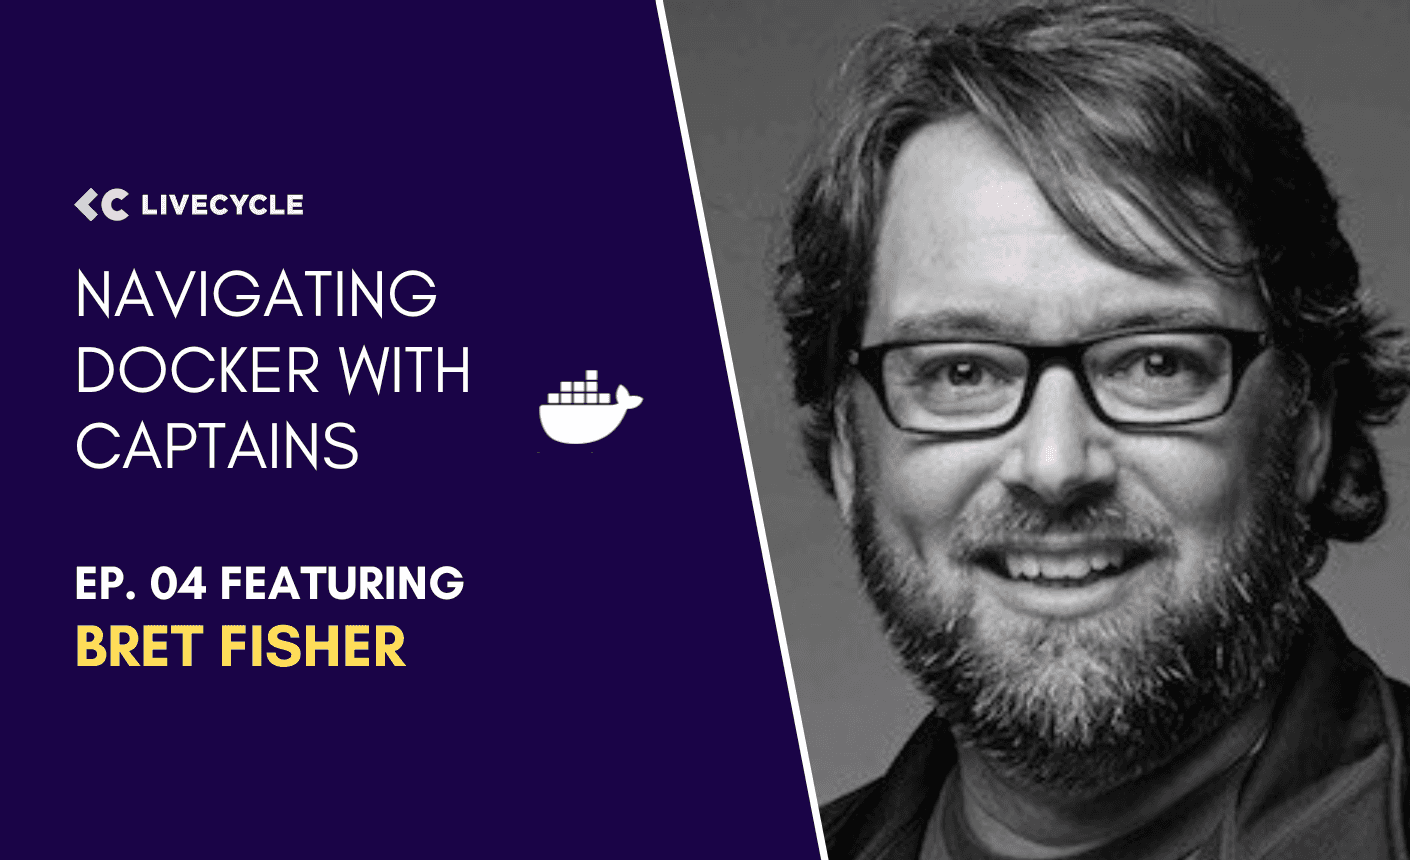 Navigating Docker With Captains Ep. 04 with Bret Fisher